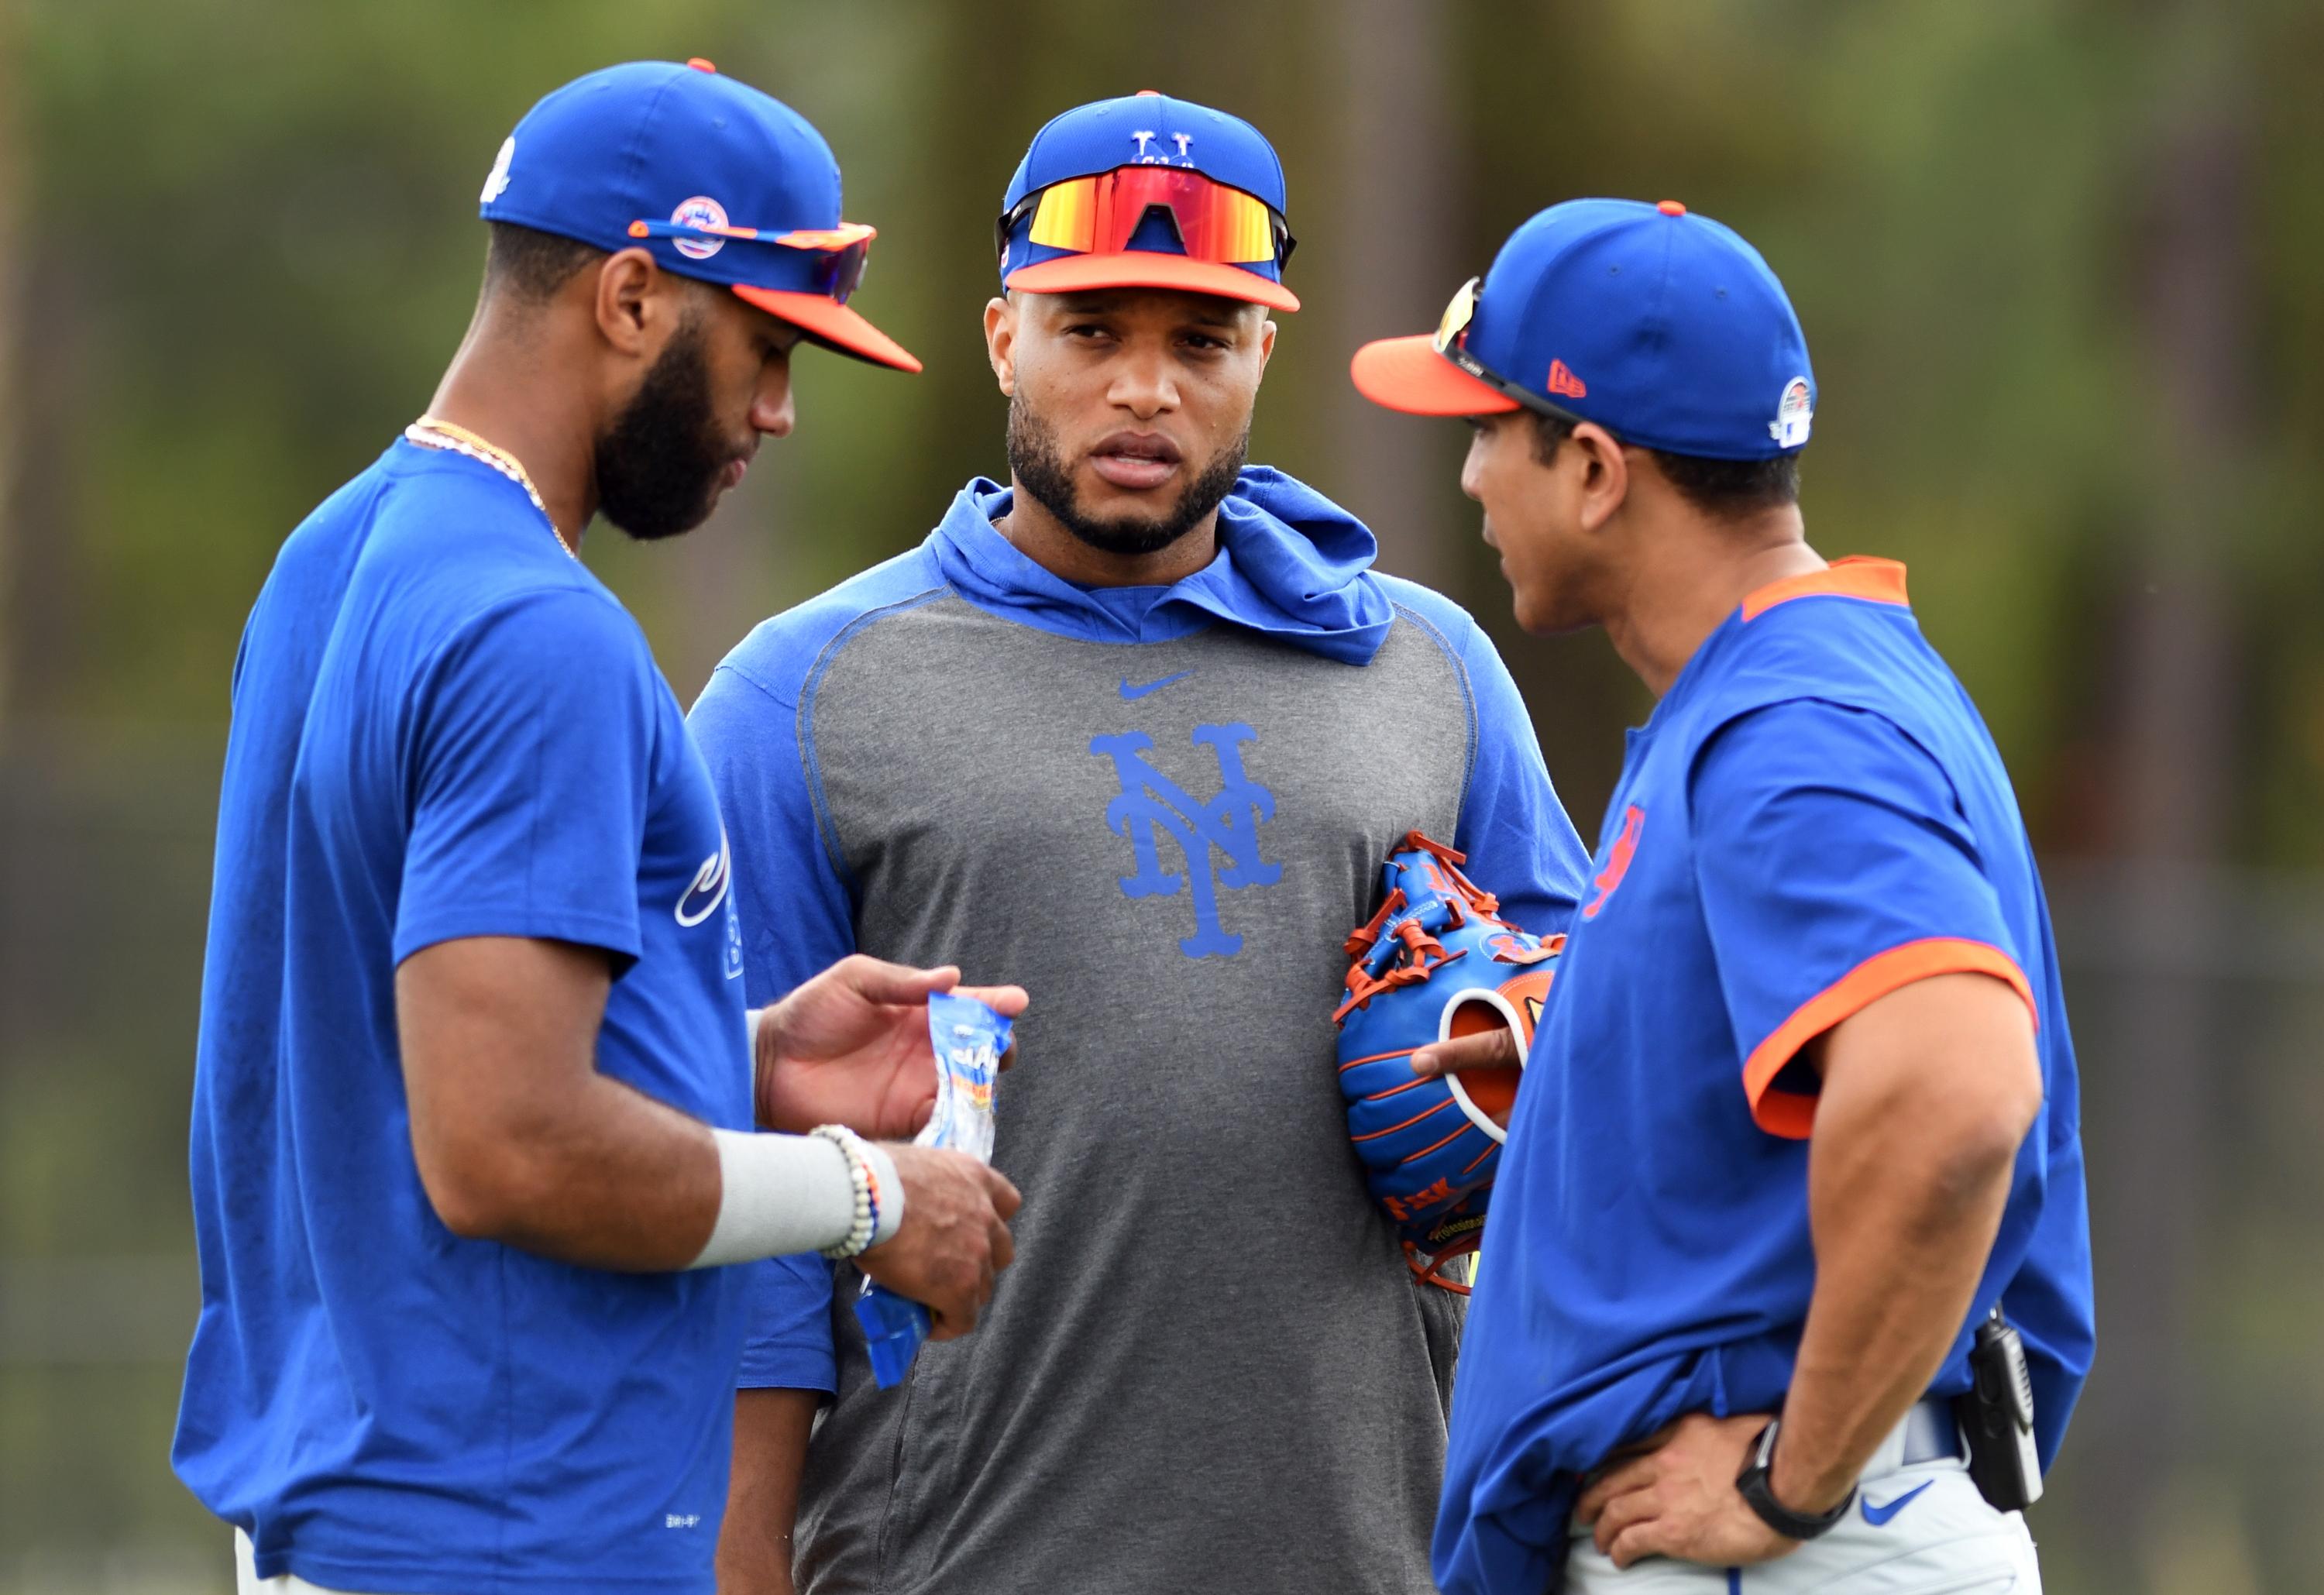 Feb 18, 2020; Port St. Lucie, Florida, USA; New York Mets infielder Robinson Cano speaks with manager Luis Rojas (right) and infielder Amed Rosario during infield practice at spring training. Mandatory Credit: Jim Rassol-USA TODAY Sports / Jim Rassol-USA TODAY Sports